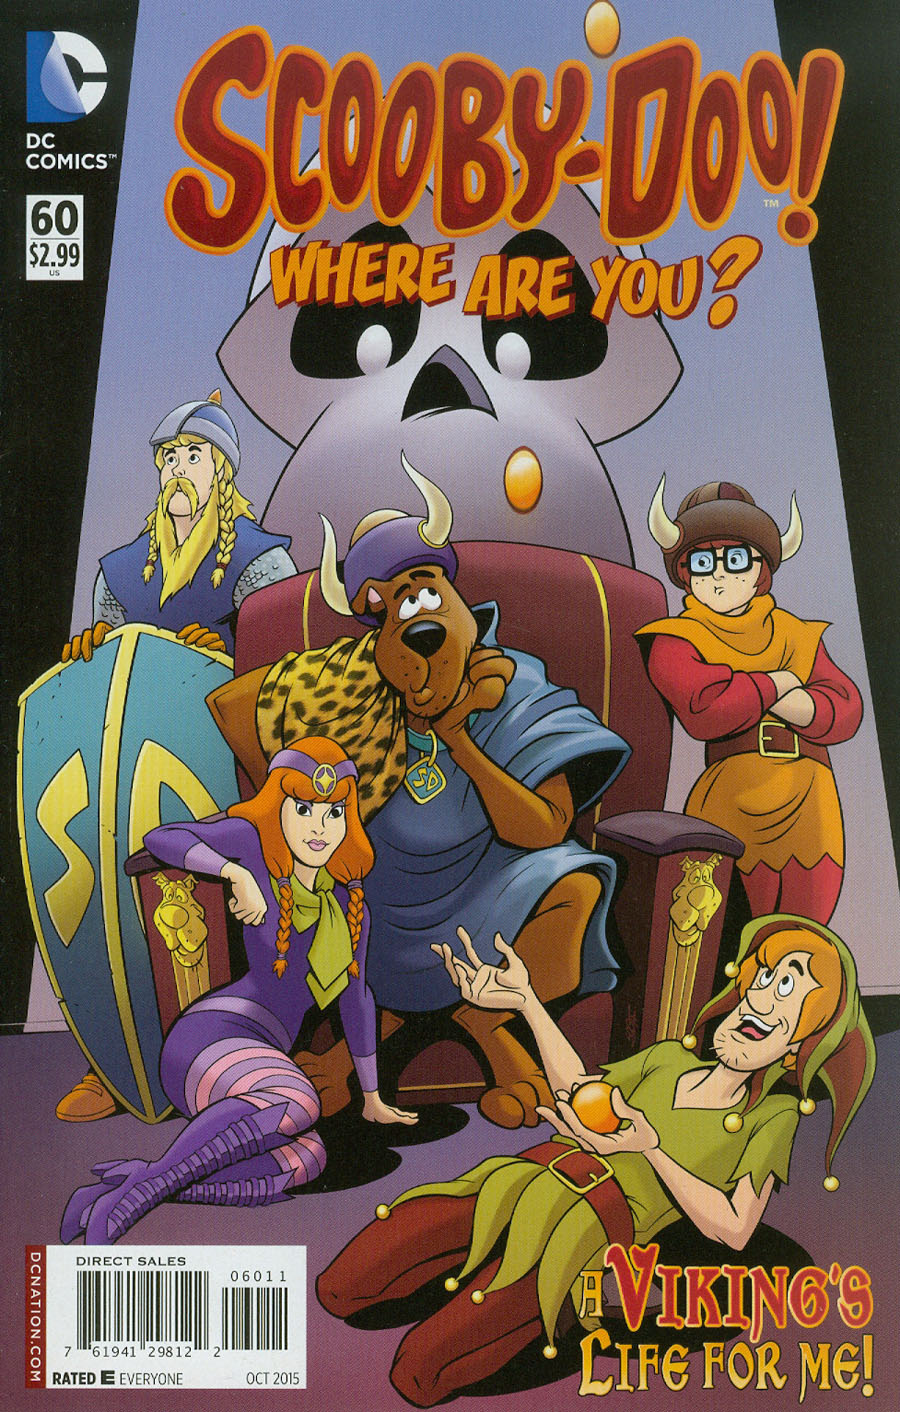 Scooby-Doo Where Are You #60